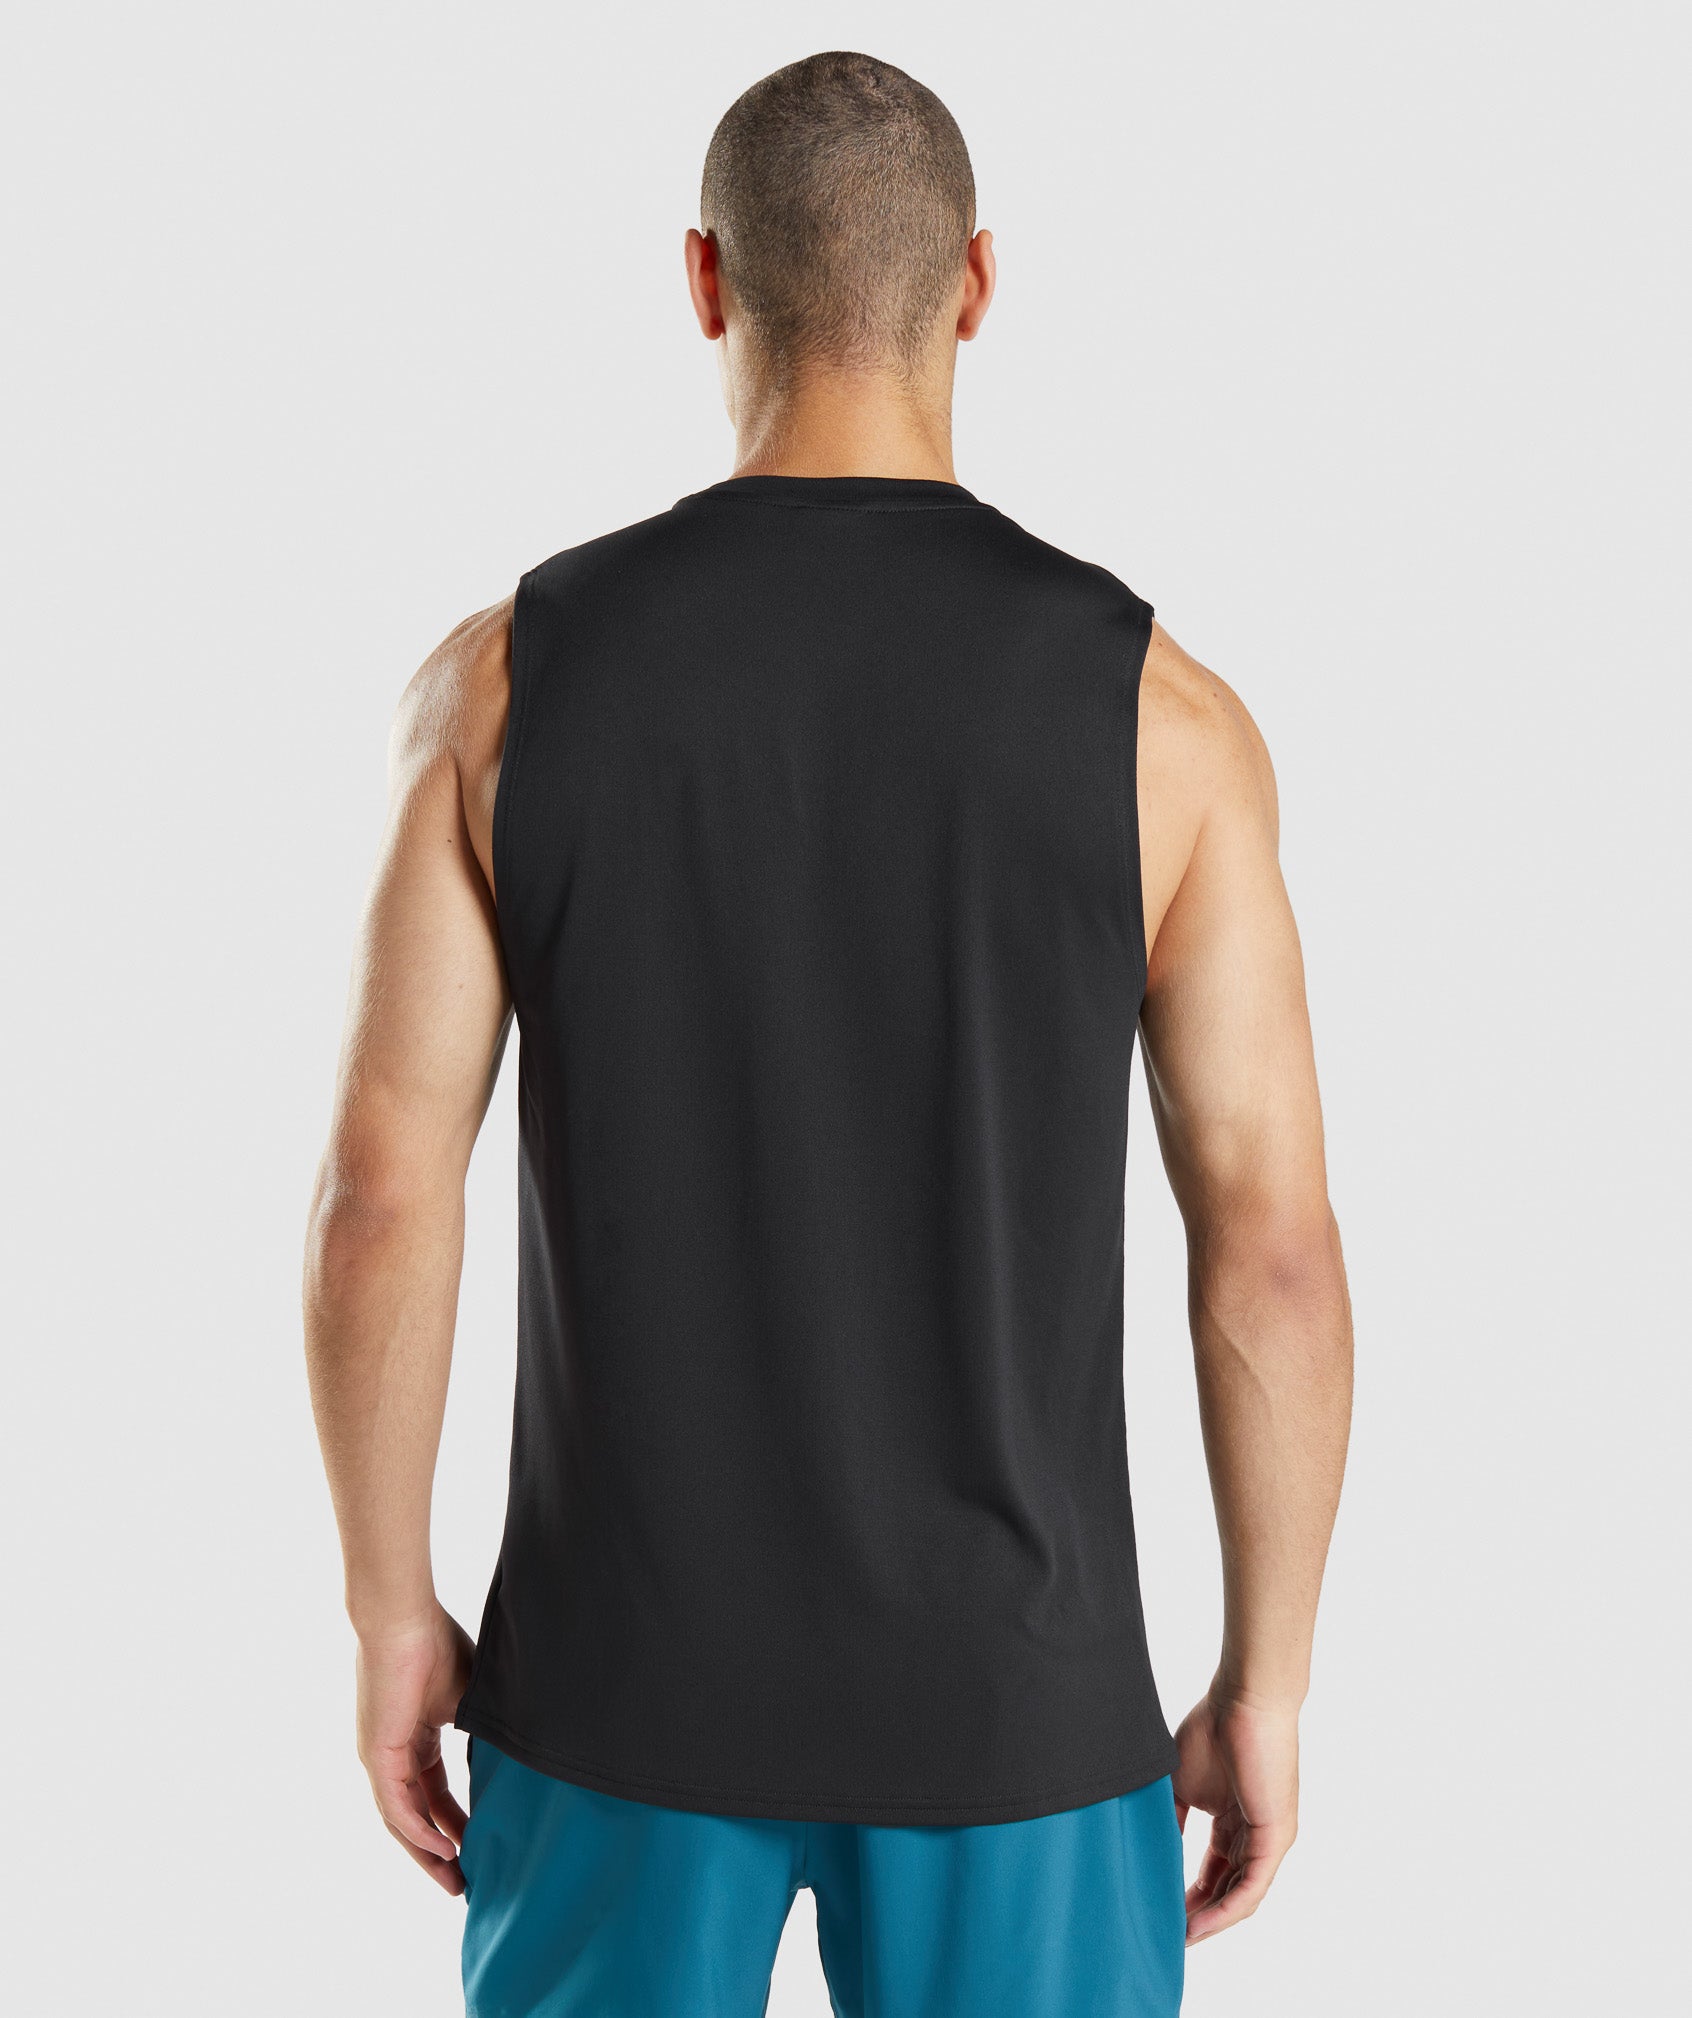 Arrival Sleeveless T-Shirt in Black - view 2